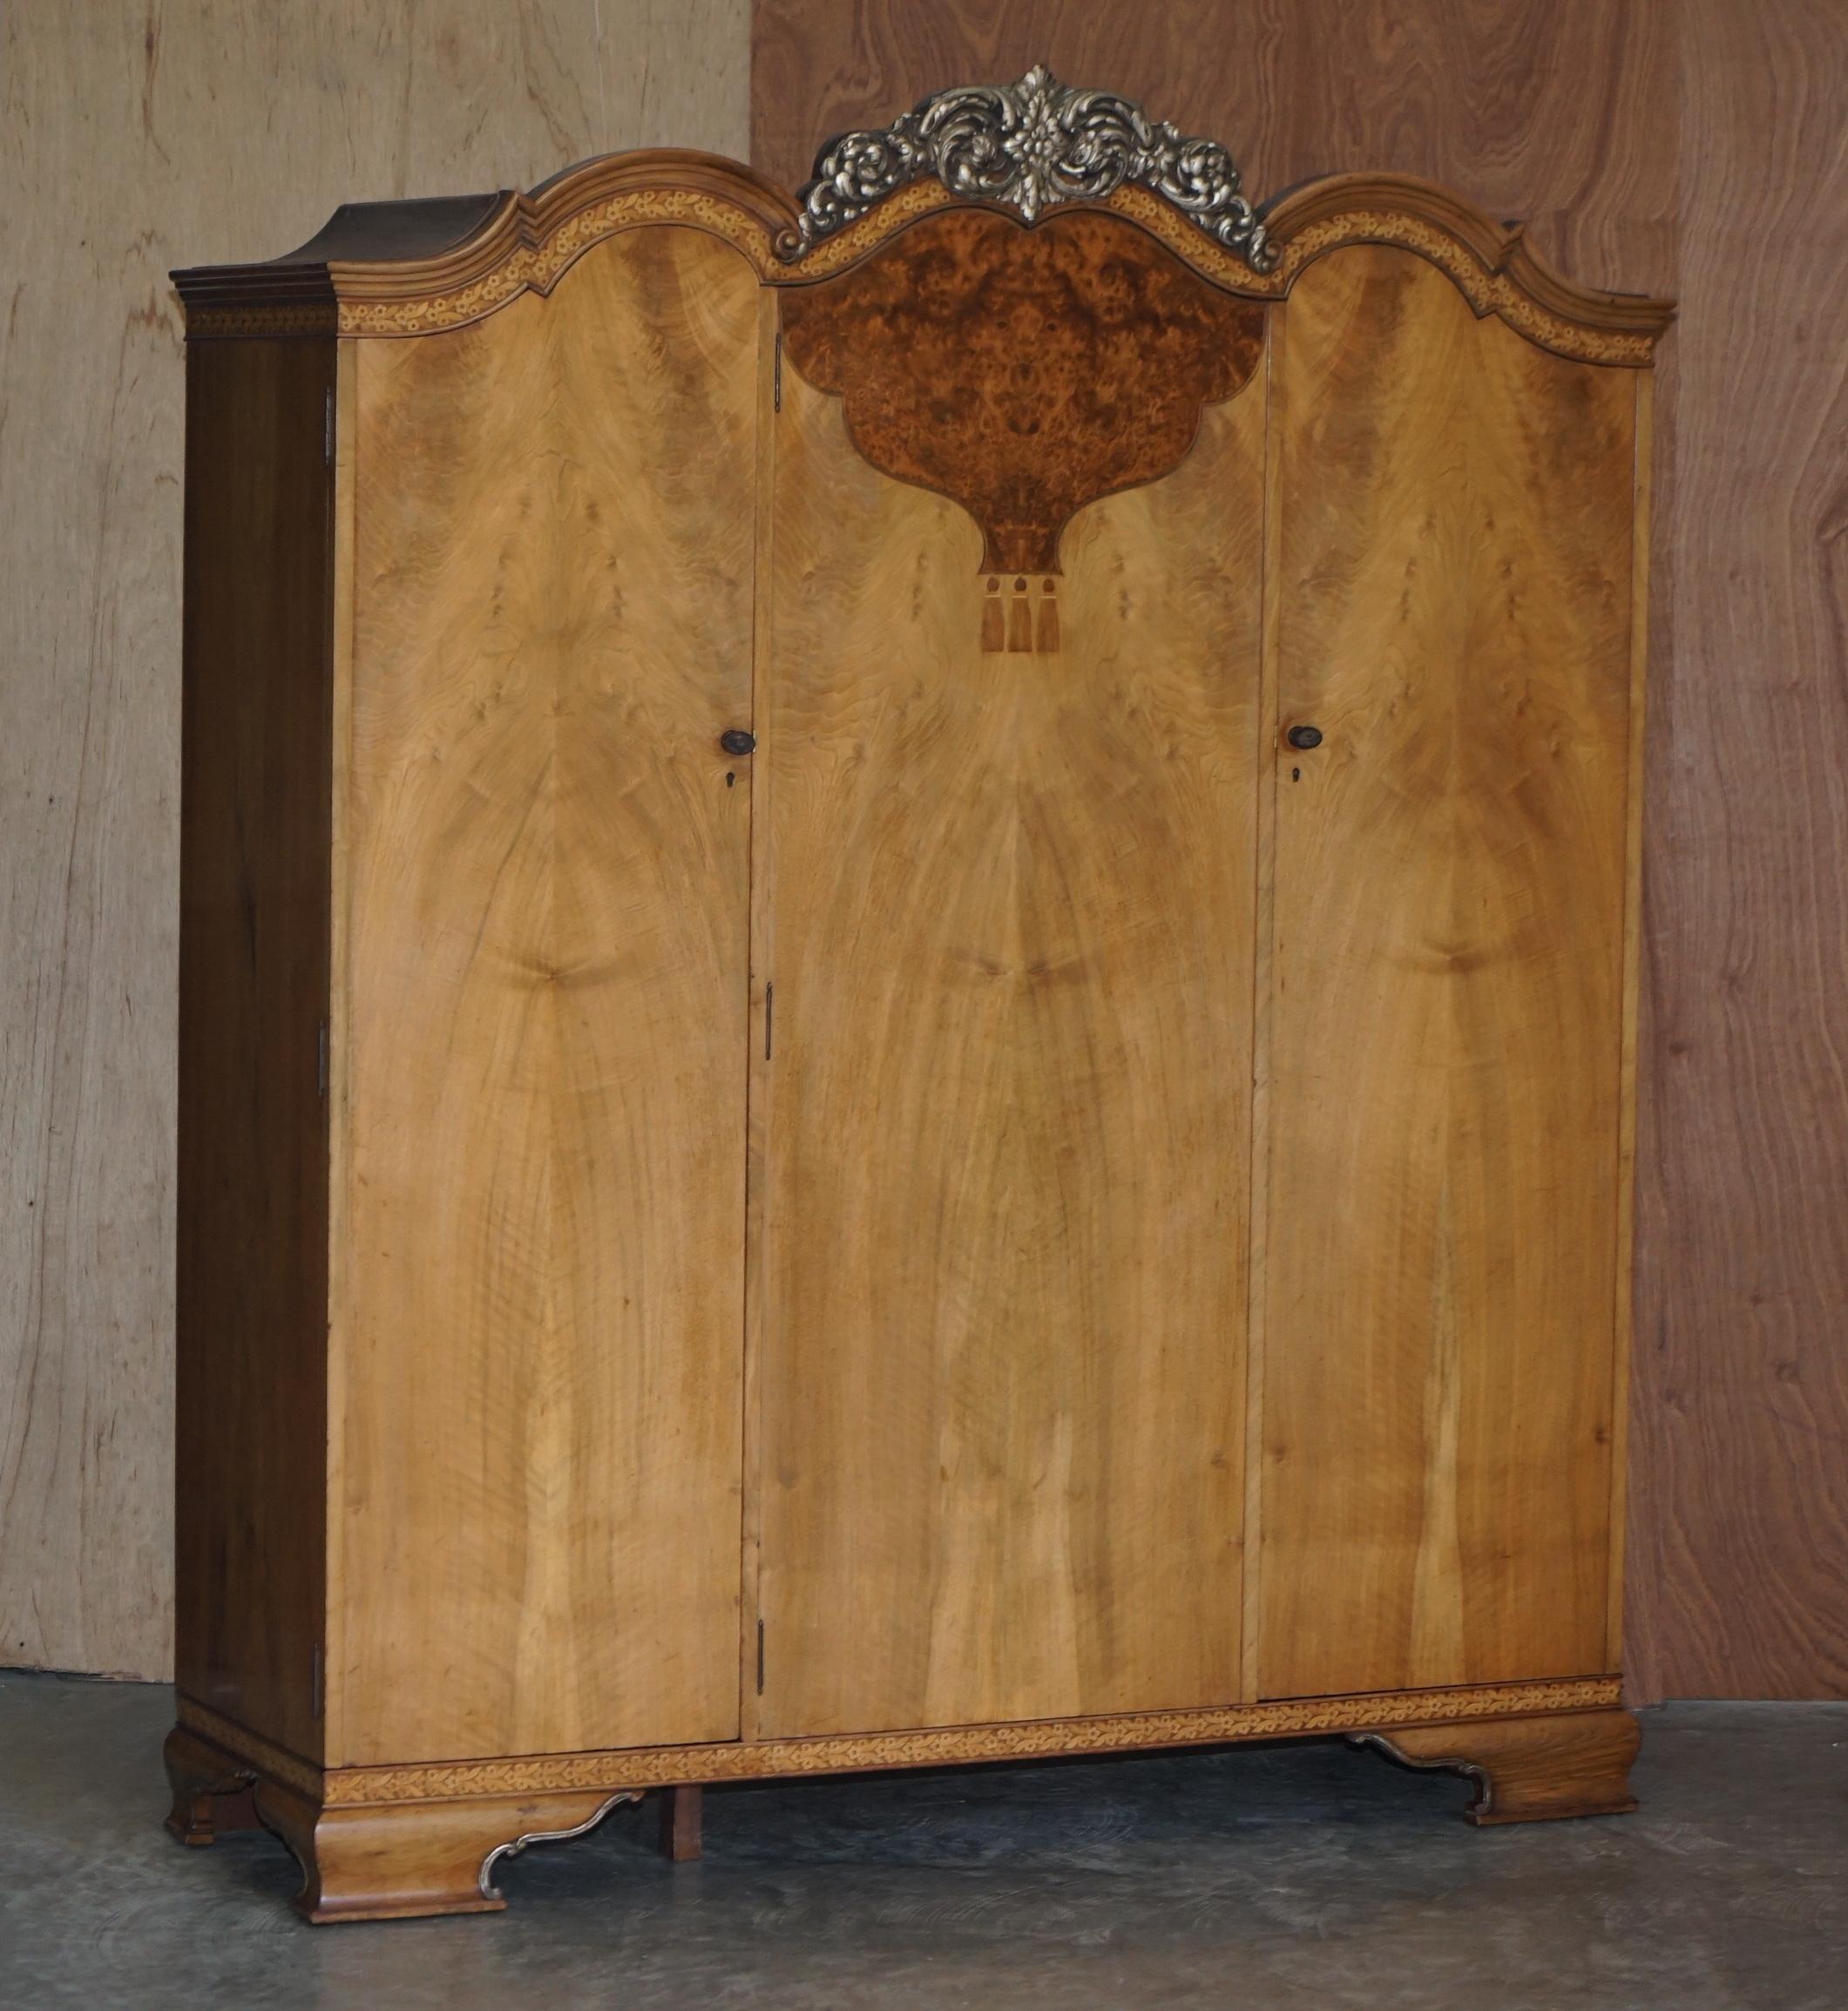 We are delighted to offer for sale this finest quality Waring & Gillow Lancaster, Burr Walnut inlaid wardrobe which is part of a suite

This is as mentioned, the finest quality I have ever seen for this type of furniture, it truly is a master